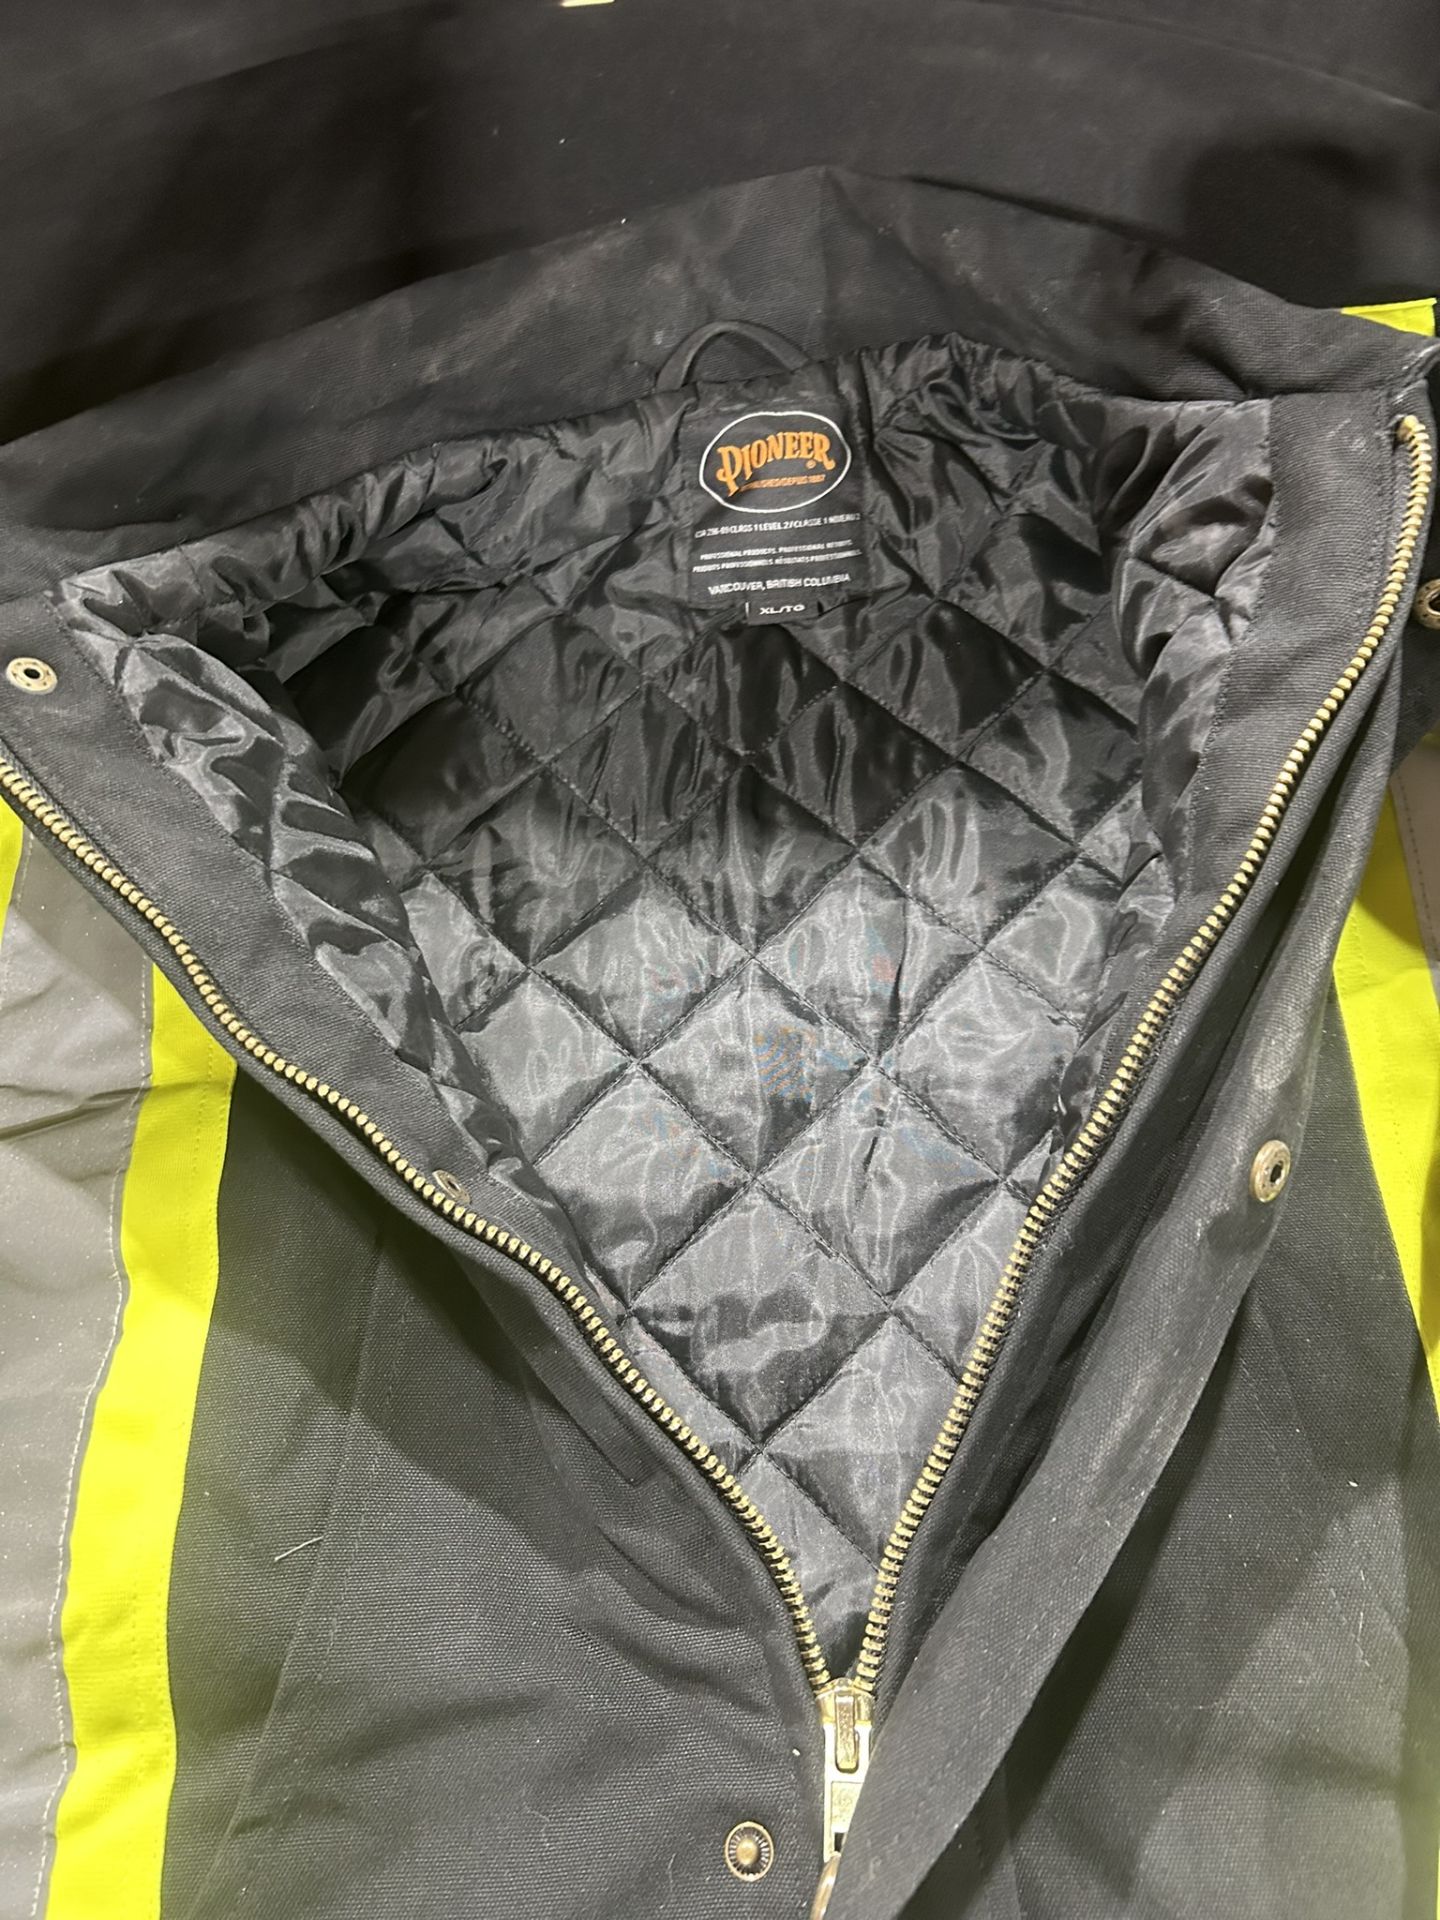 2-PIONEER INSULATED XL SAFETY BOMBER JACKETS - Image 8 of 9